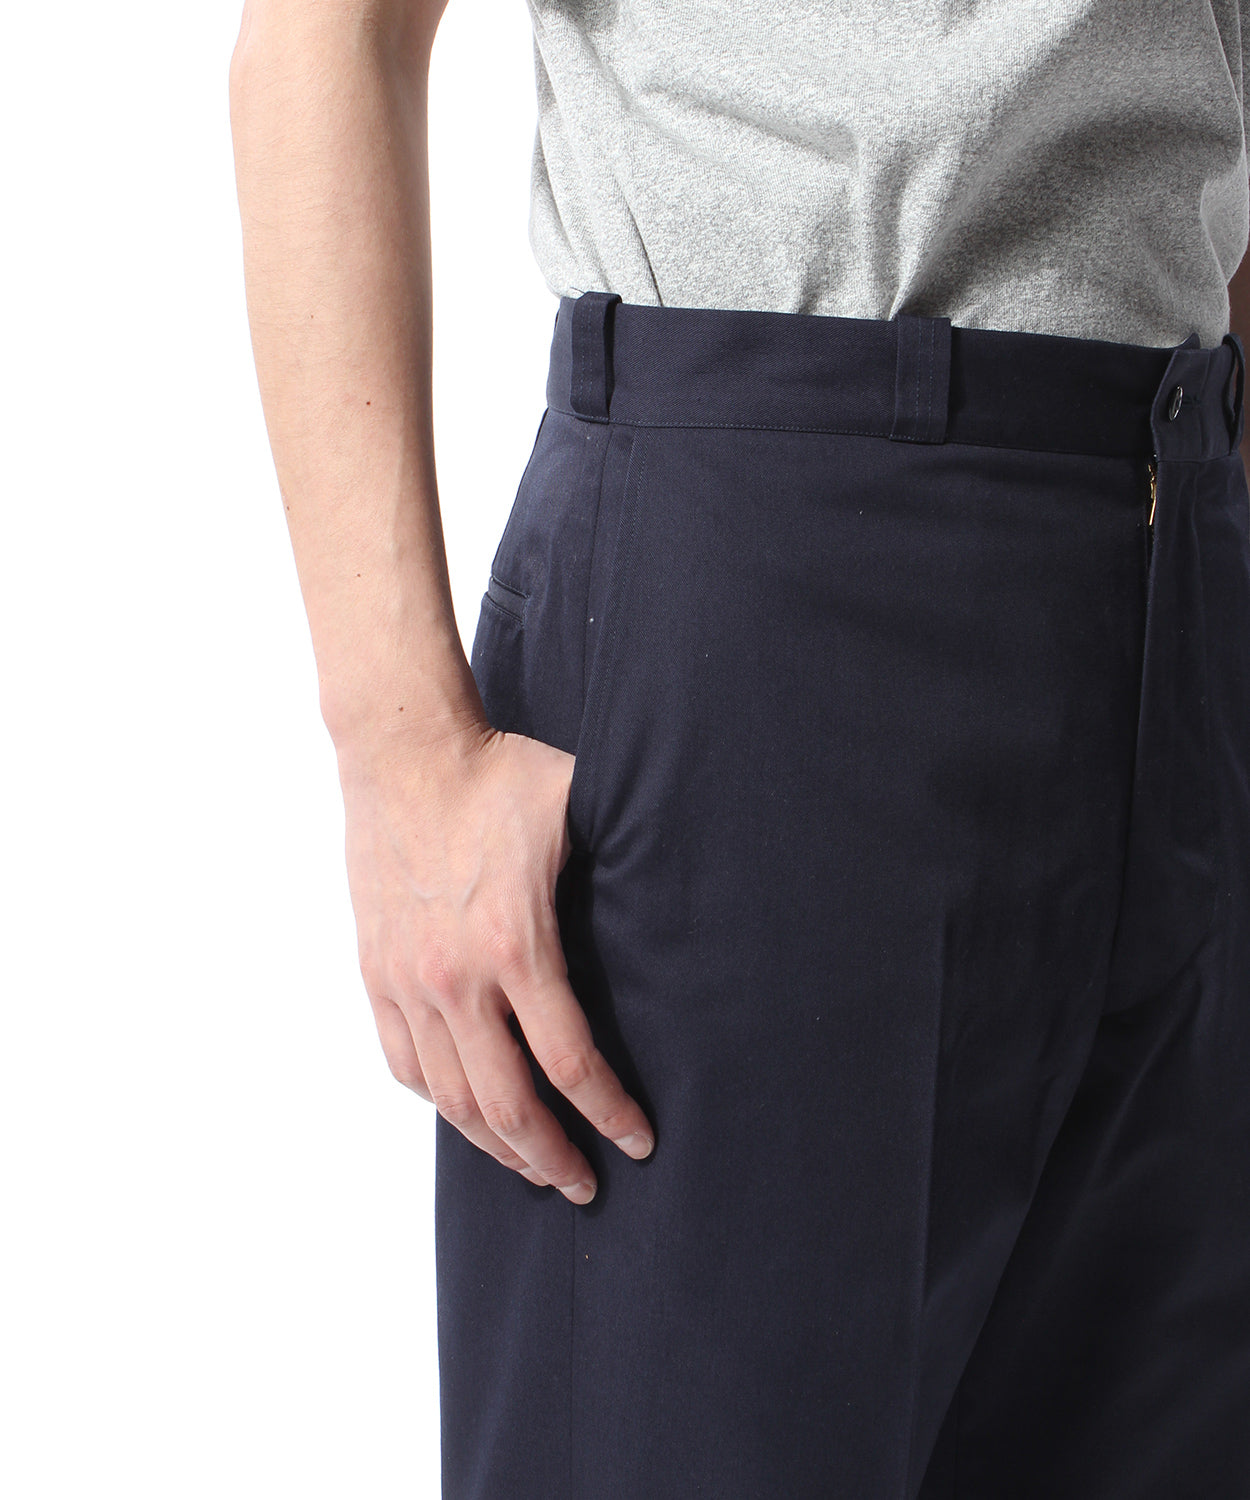 【YANKSHIRE] Trousers 1963 Stay Pressed Twill